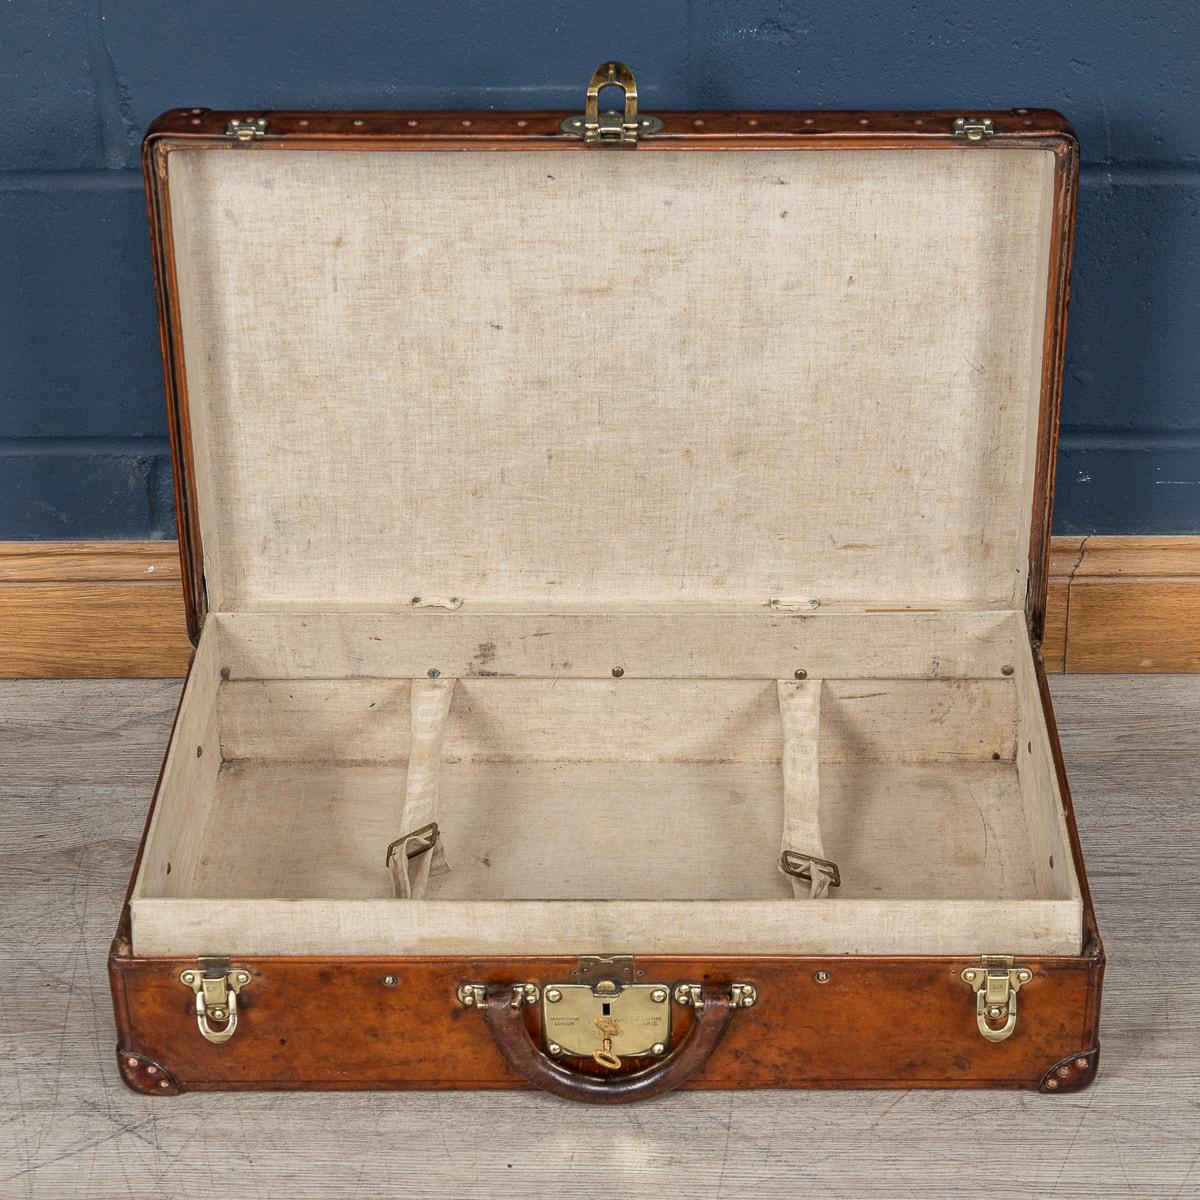 20th Century Louis Vuitton Suitcase In Natural Cow Hide, France c.1910 For Sale 3